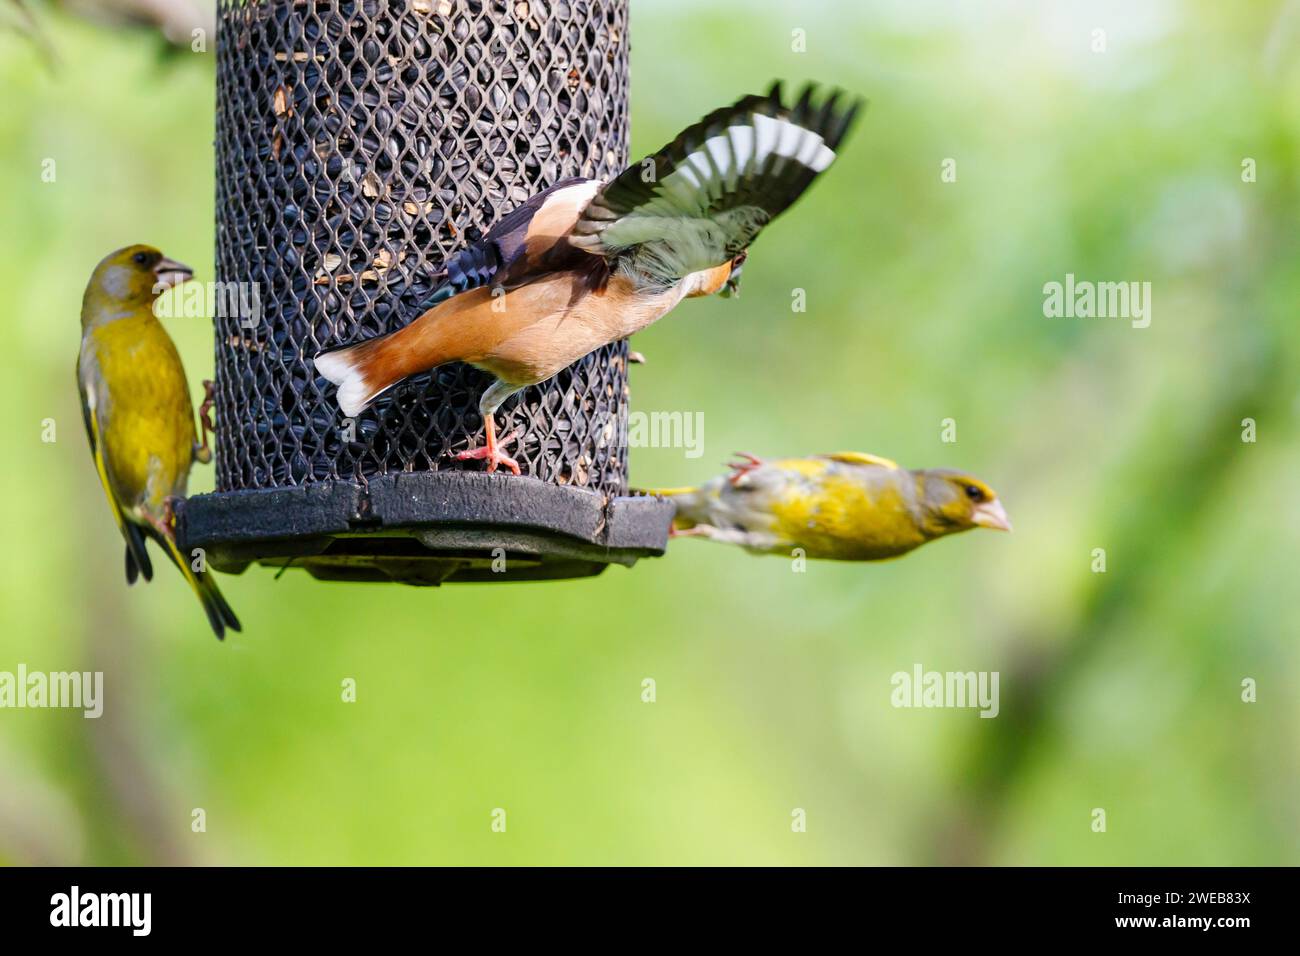 A hawfinch (Coccothraustes coccothraustes) squabbles with a siskin (Carduelis spinus) at a bird feeder, in Koros-Maros National Park, Hungary Stock Photo